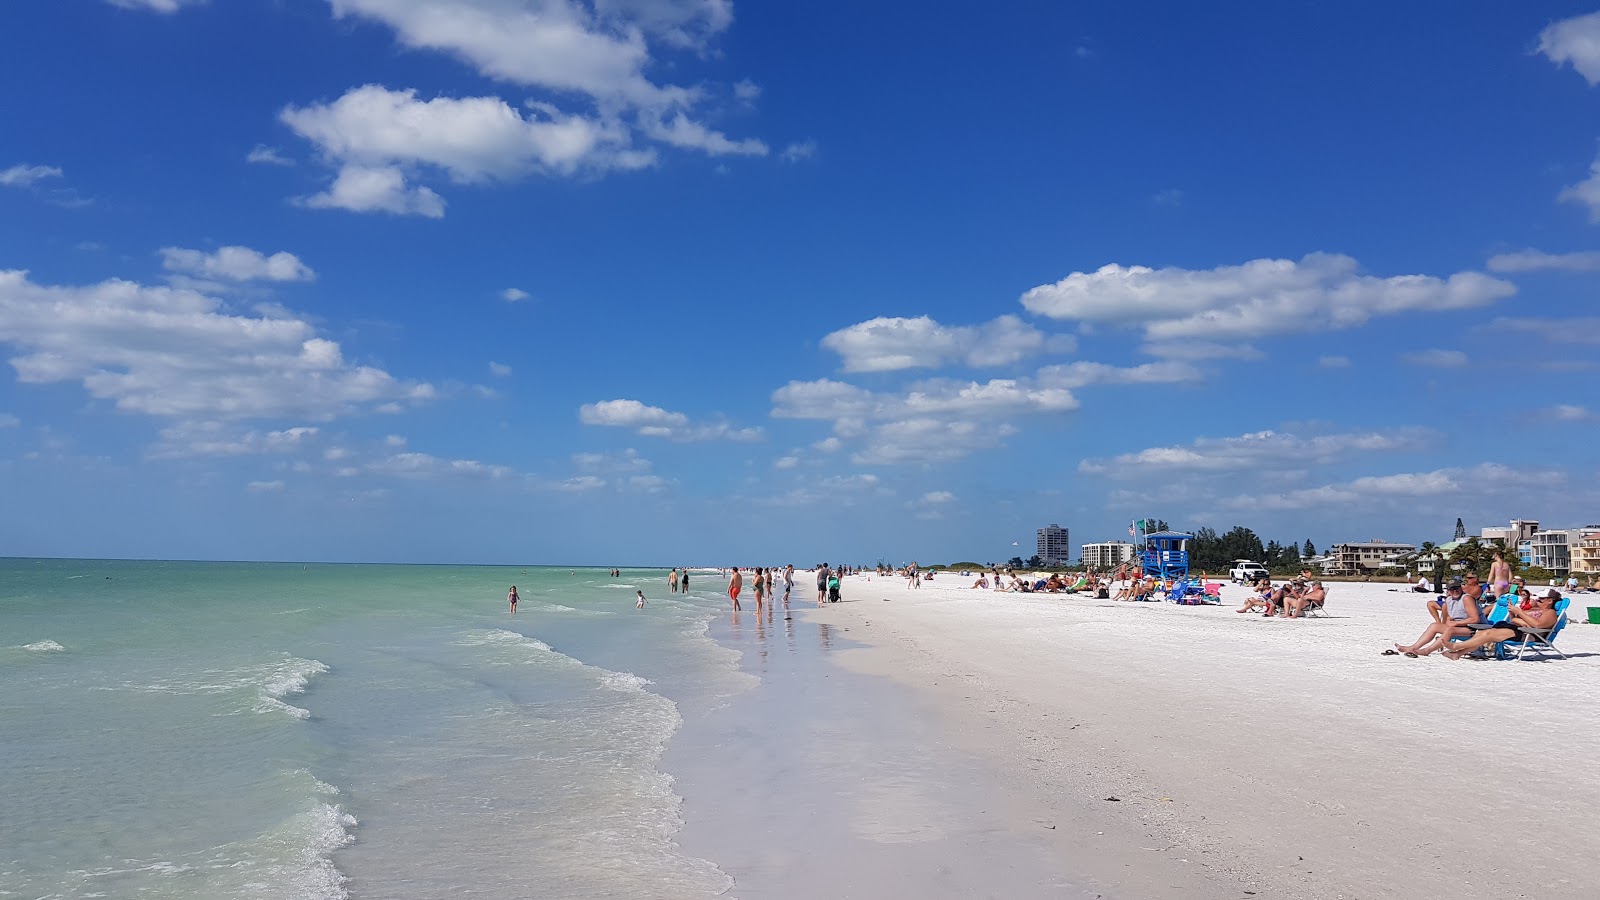 Siesta key beach on the map with photos and reviewsðï